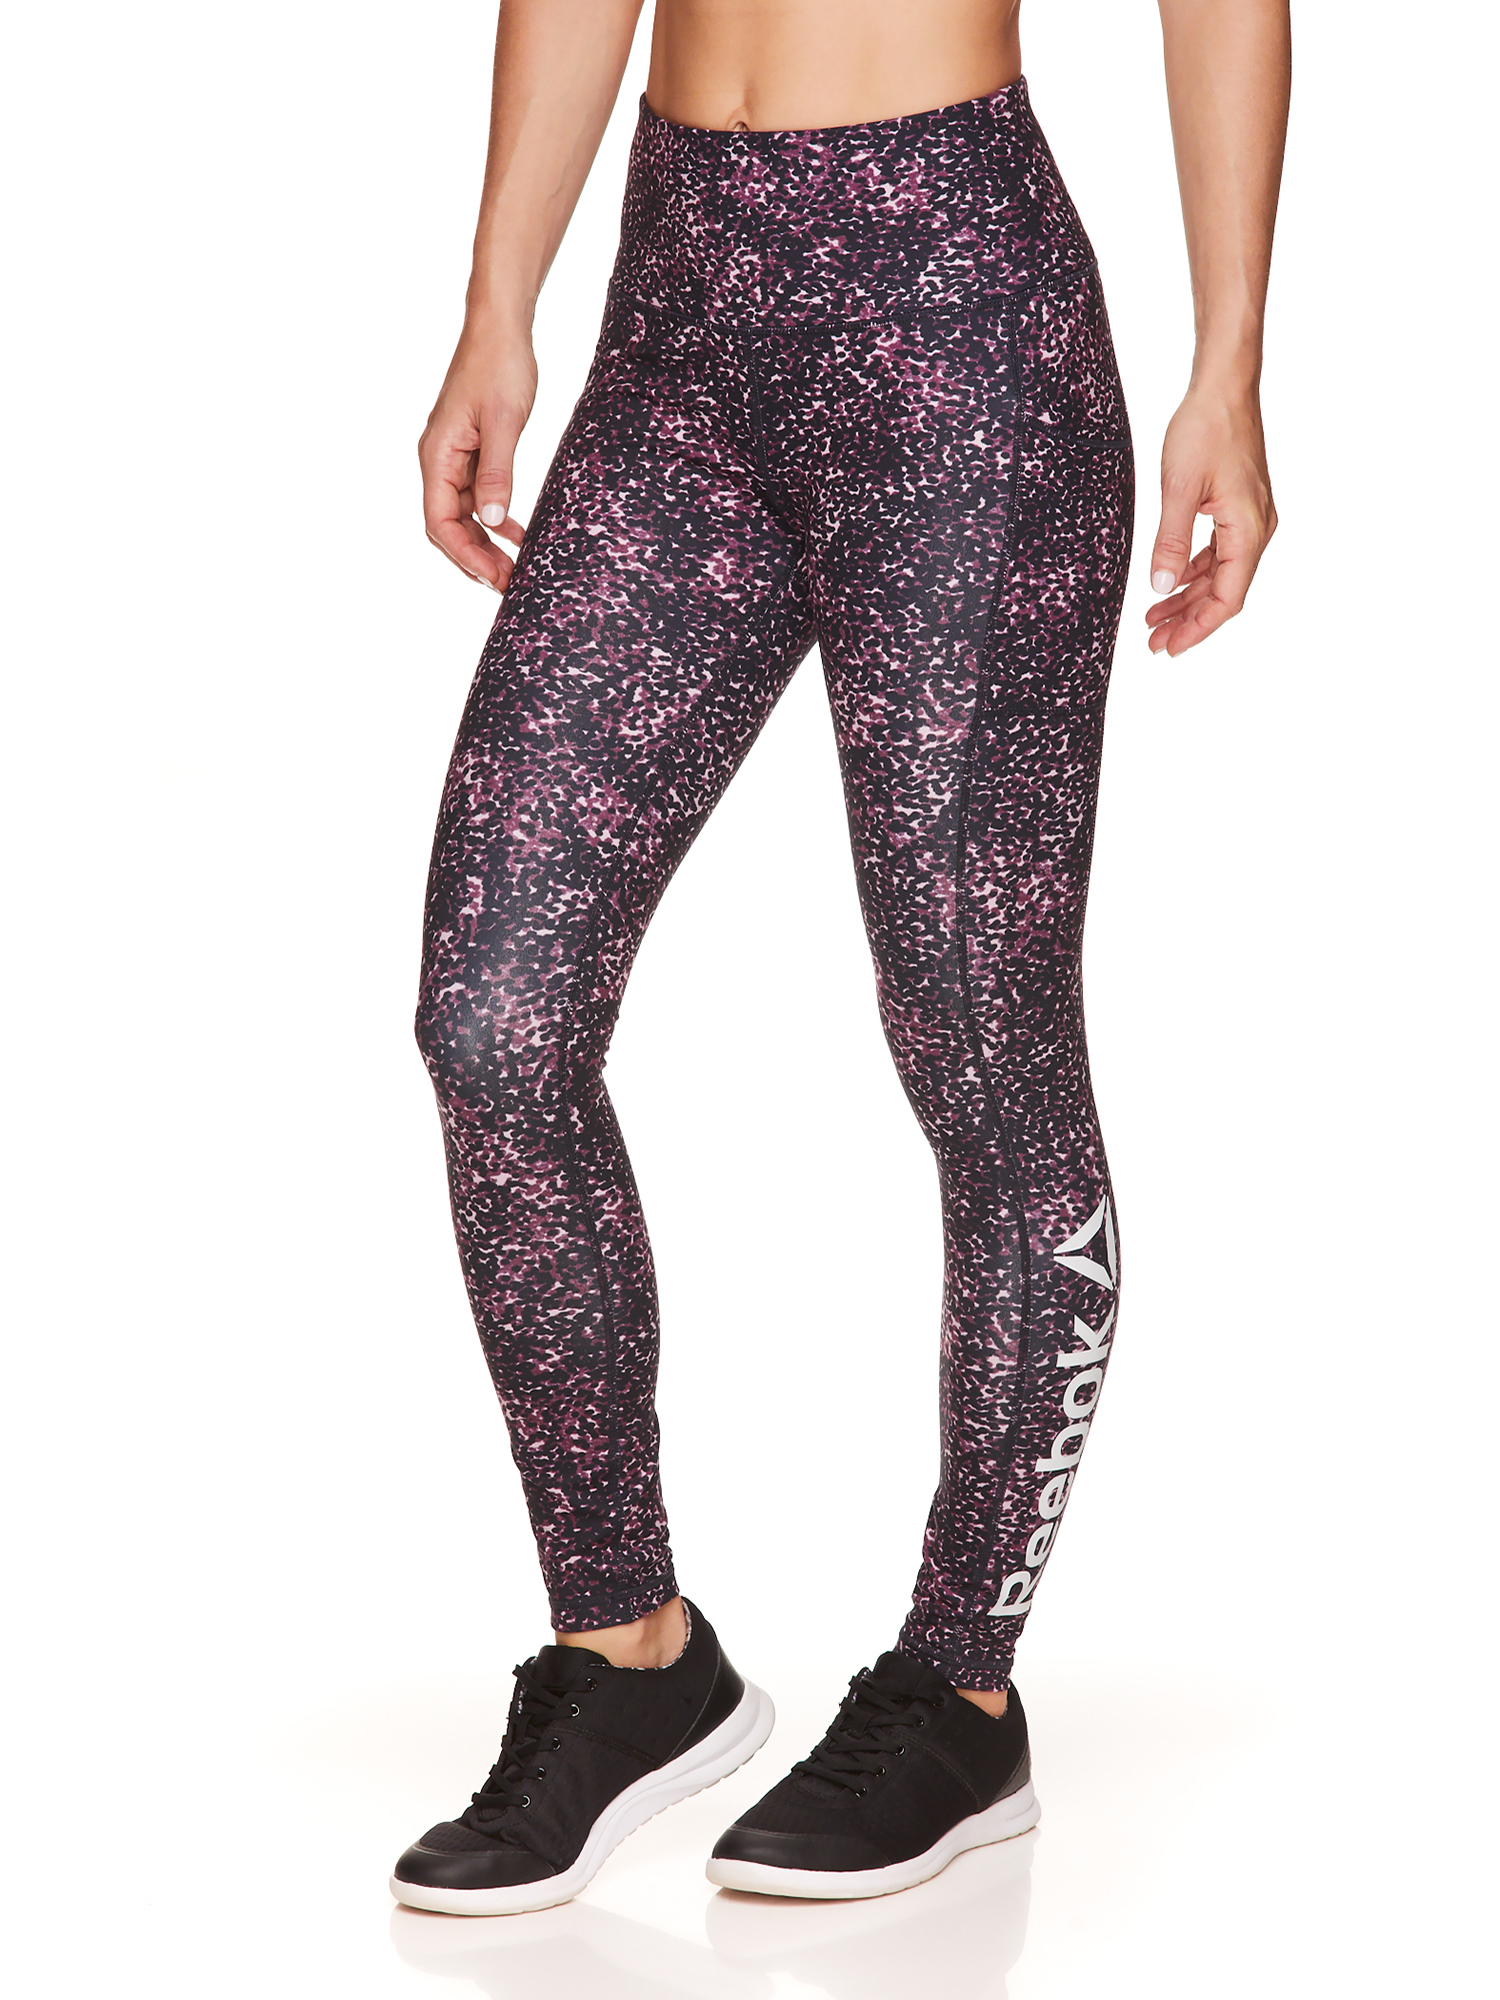 Reebok Womens High-Waisted Active Leggings with Pockets, Dotty Animal Graphic - image 3 of 4